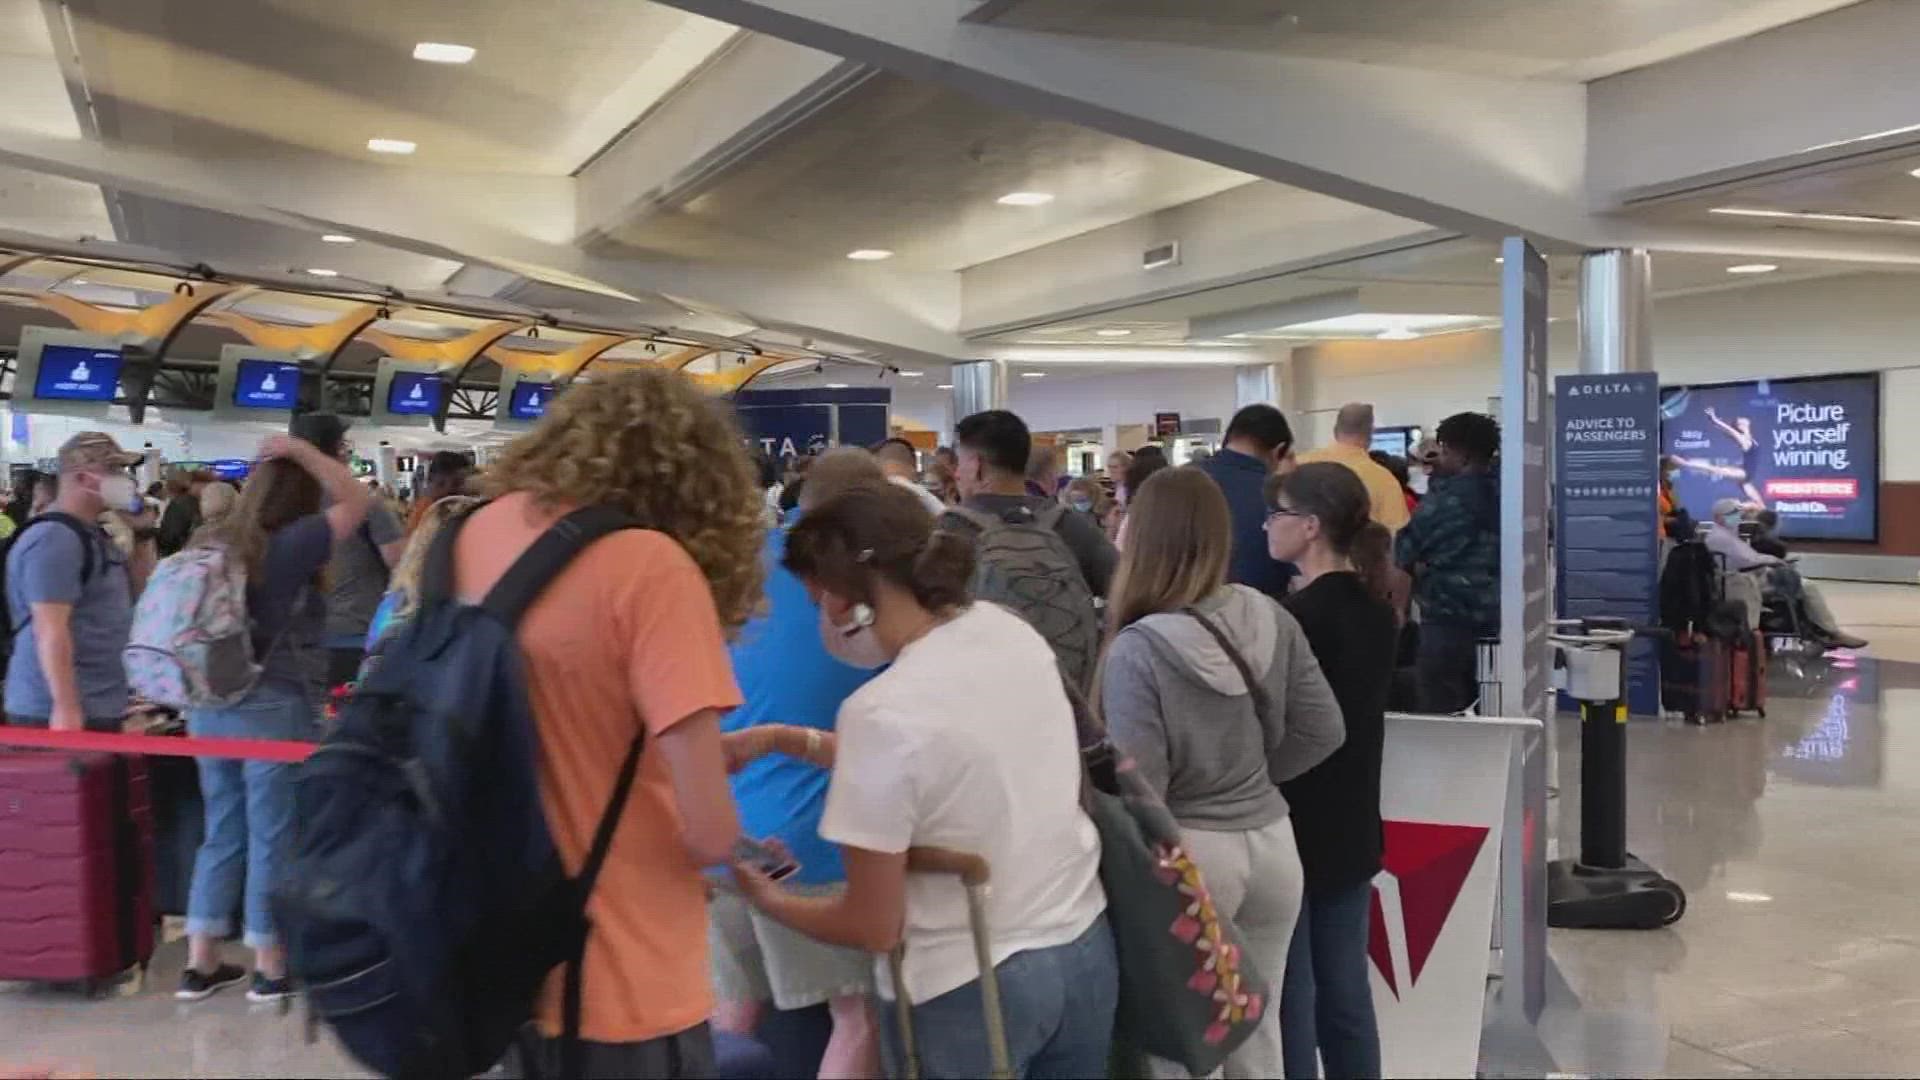 Airlines that have stumbled badly over the last two holidays face their biggest test yet of whether they can handle crowds when July 4th travelers hit the airport.